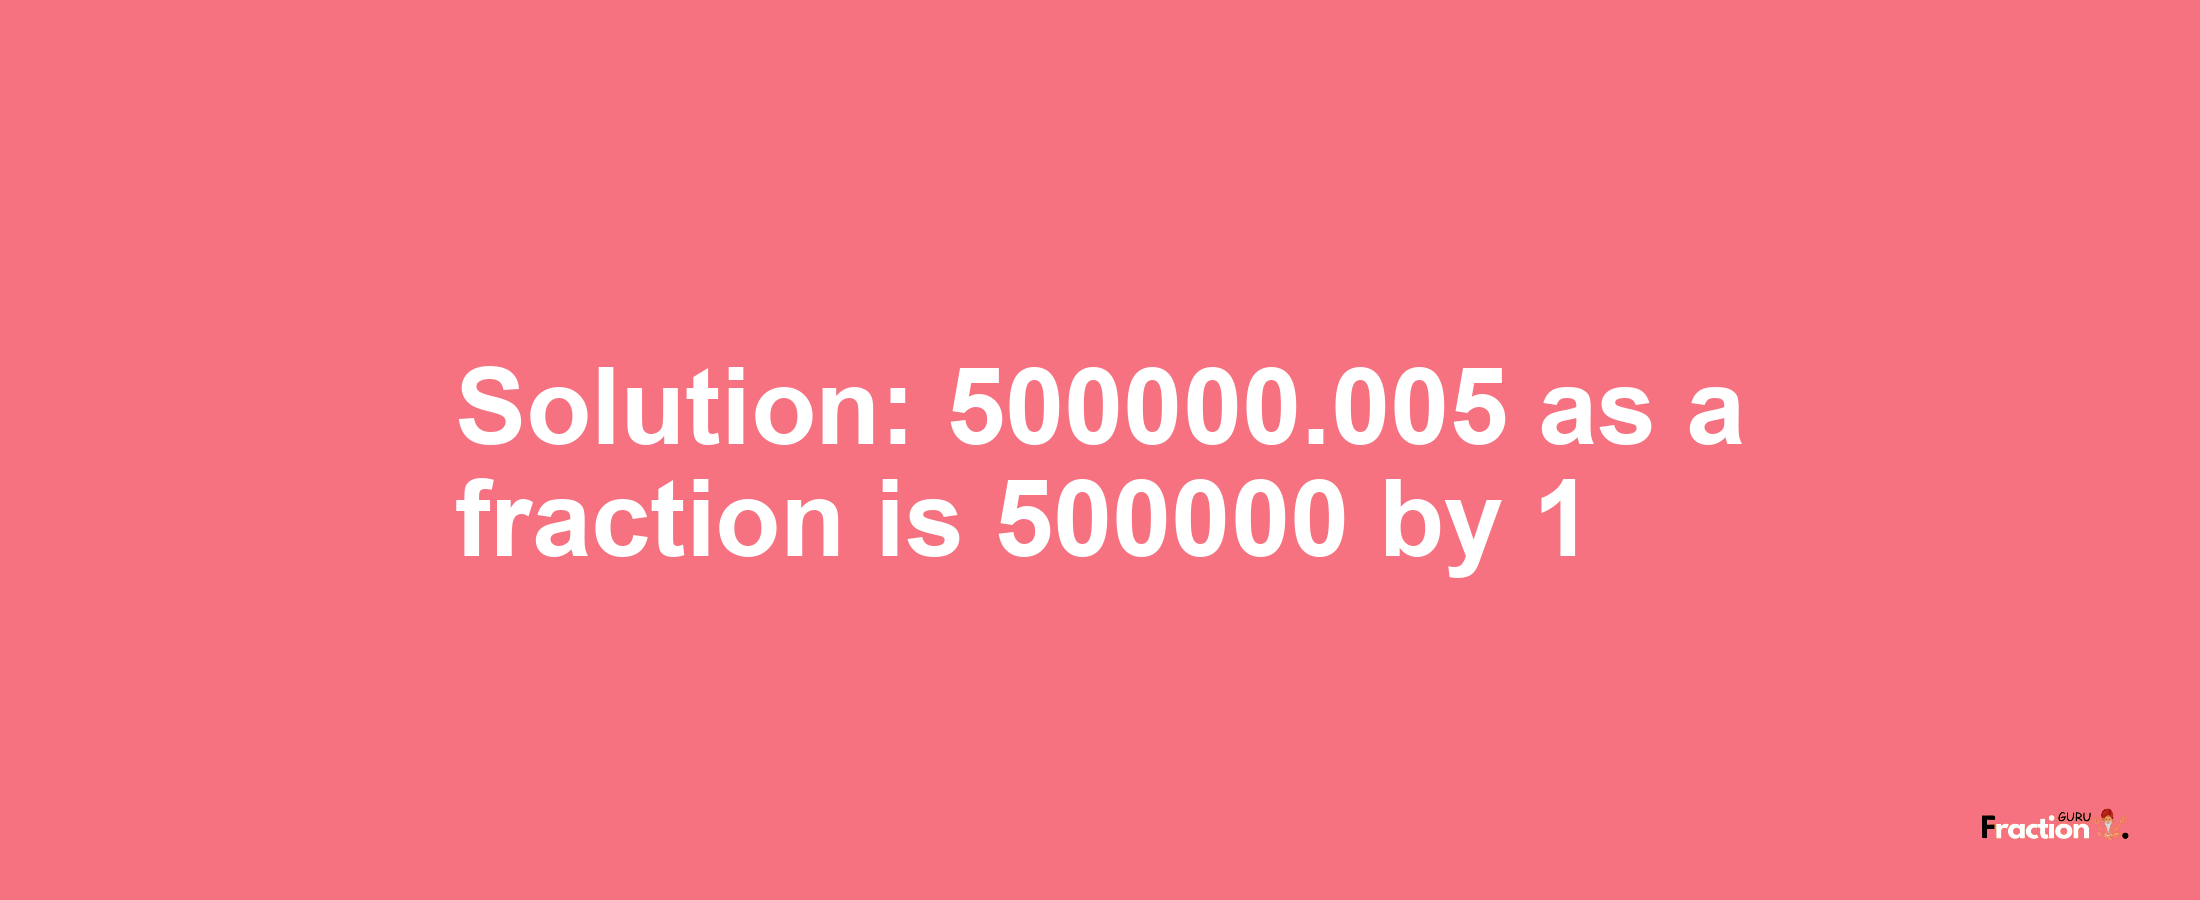 Solution:500000.005 as a fraction is 500000/1